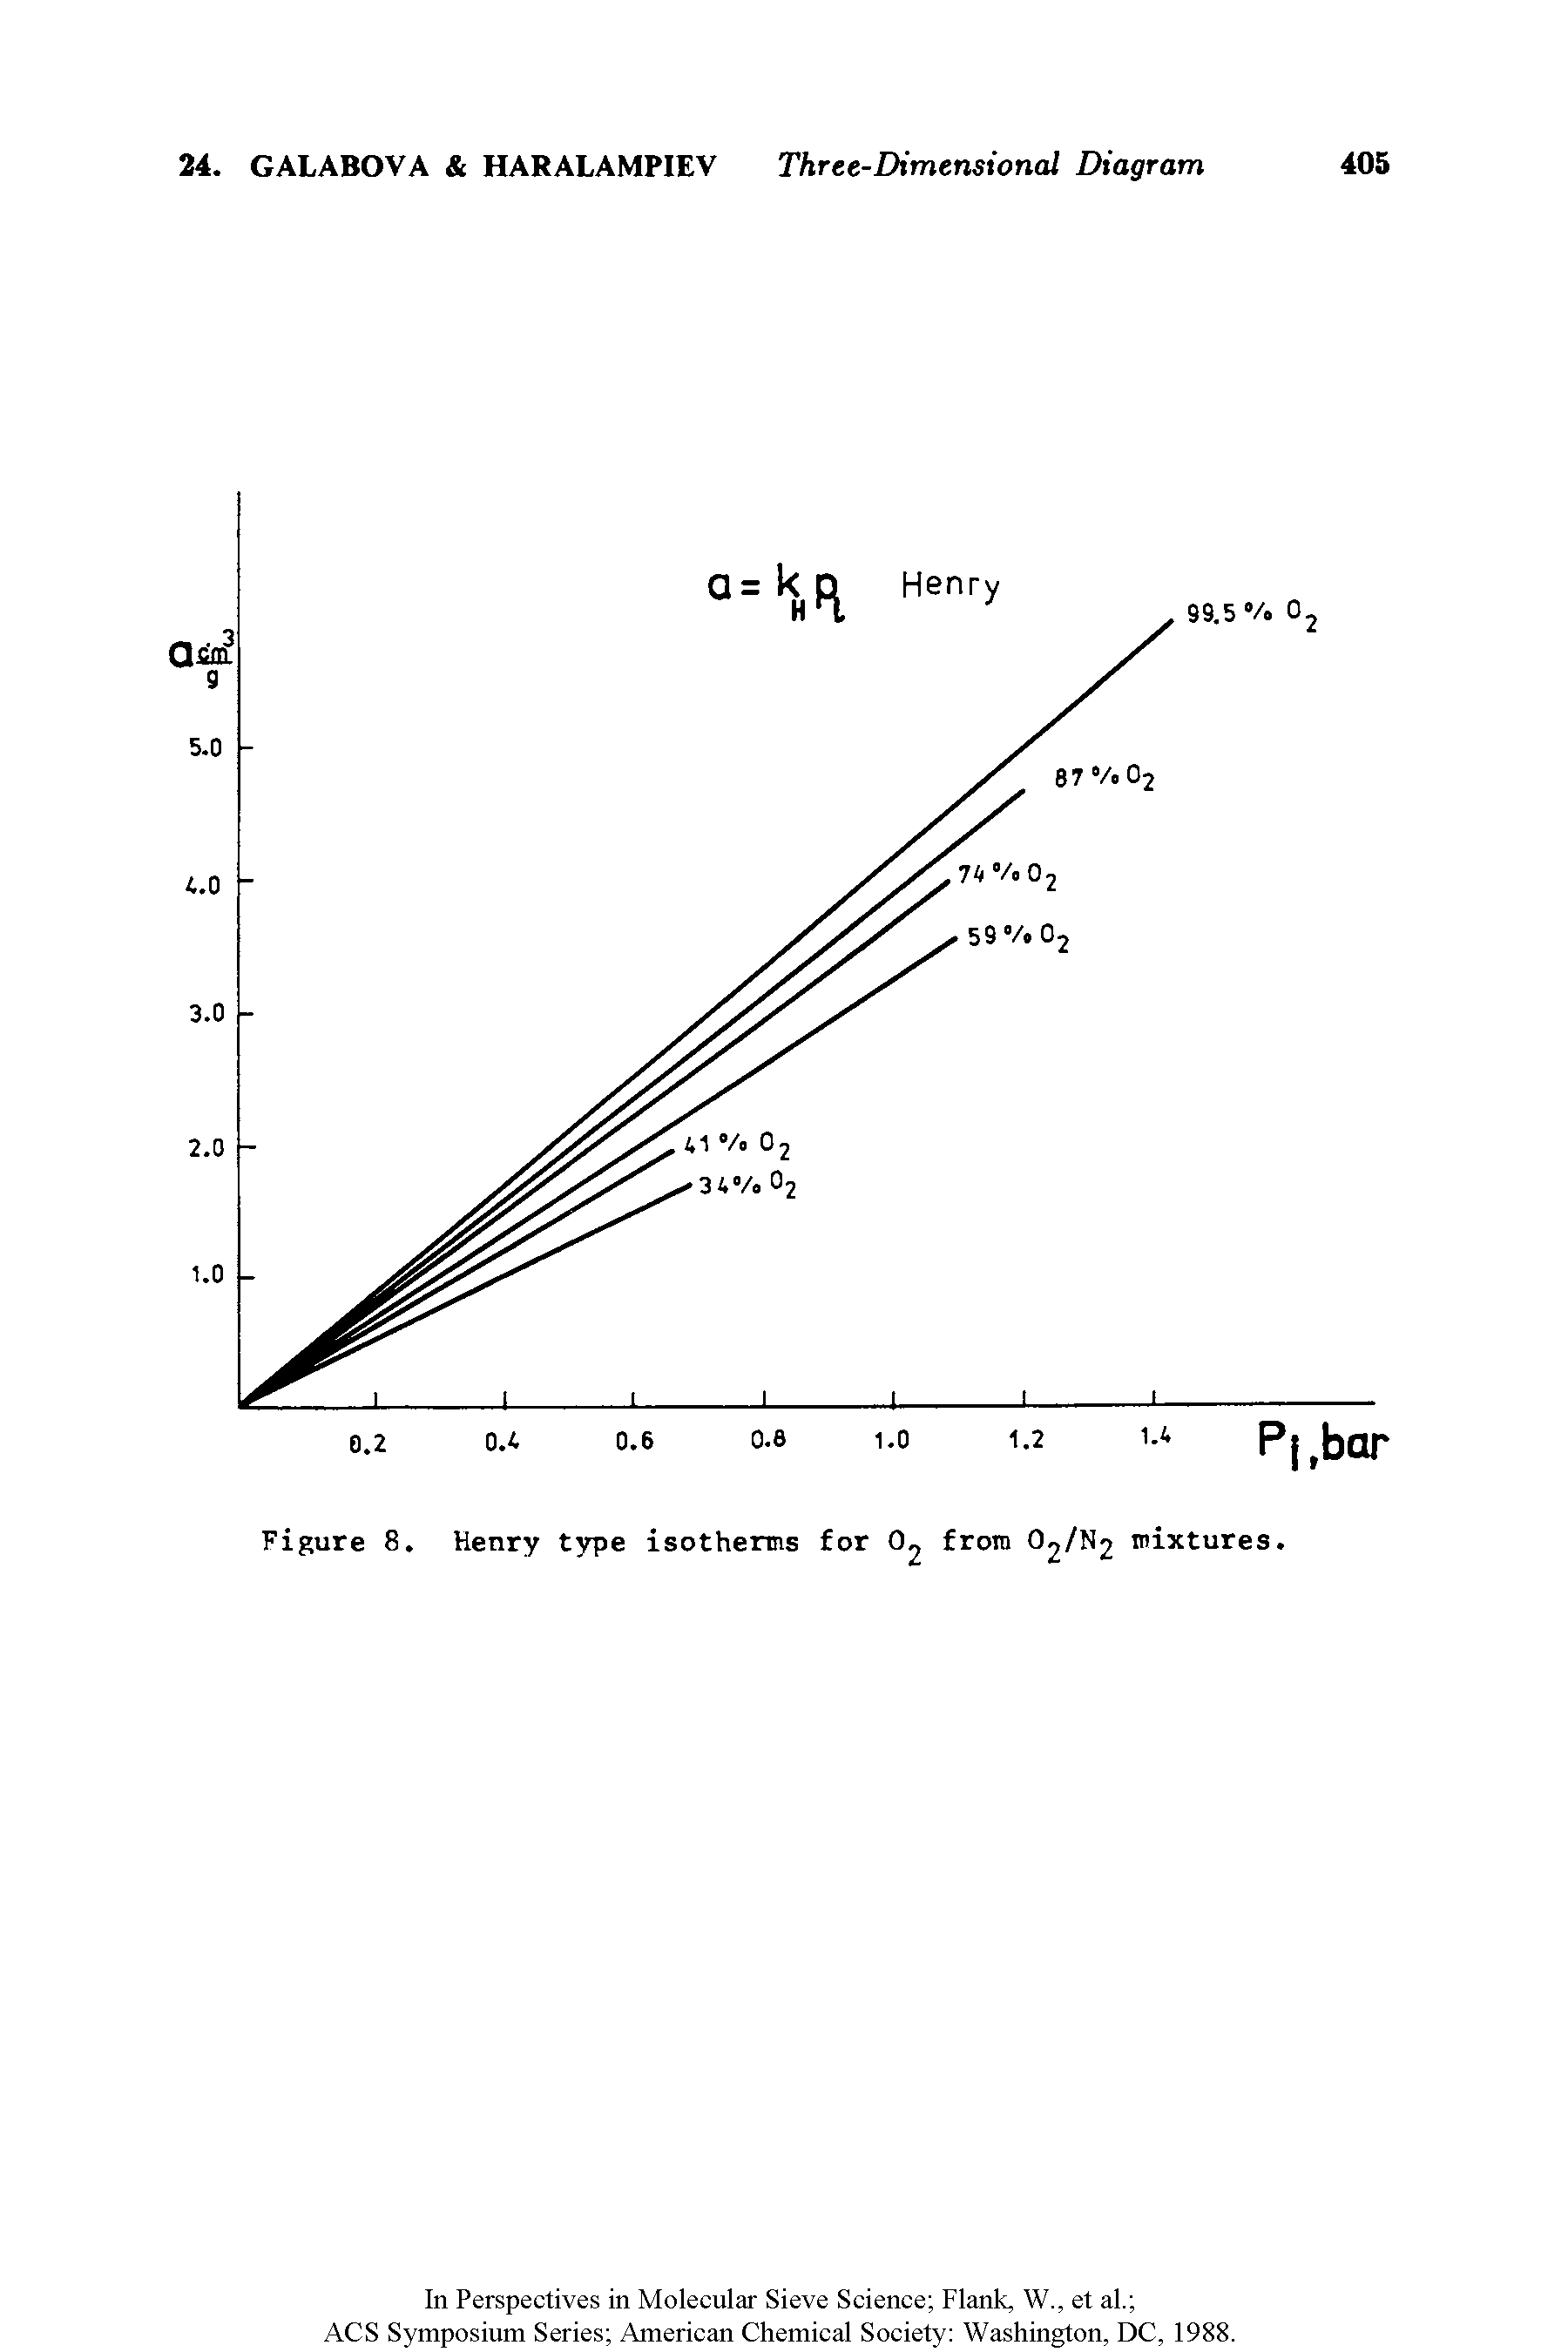 Figure 8. Henry type isotherms for from O2/N2 mixtures.